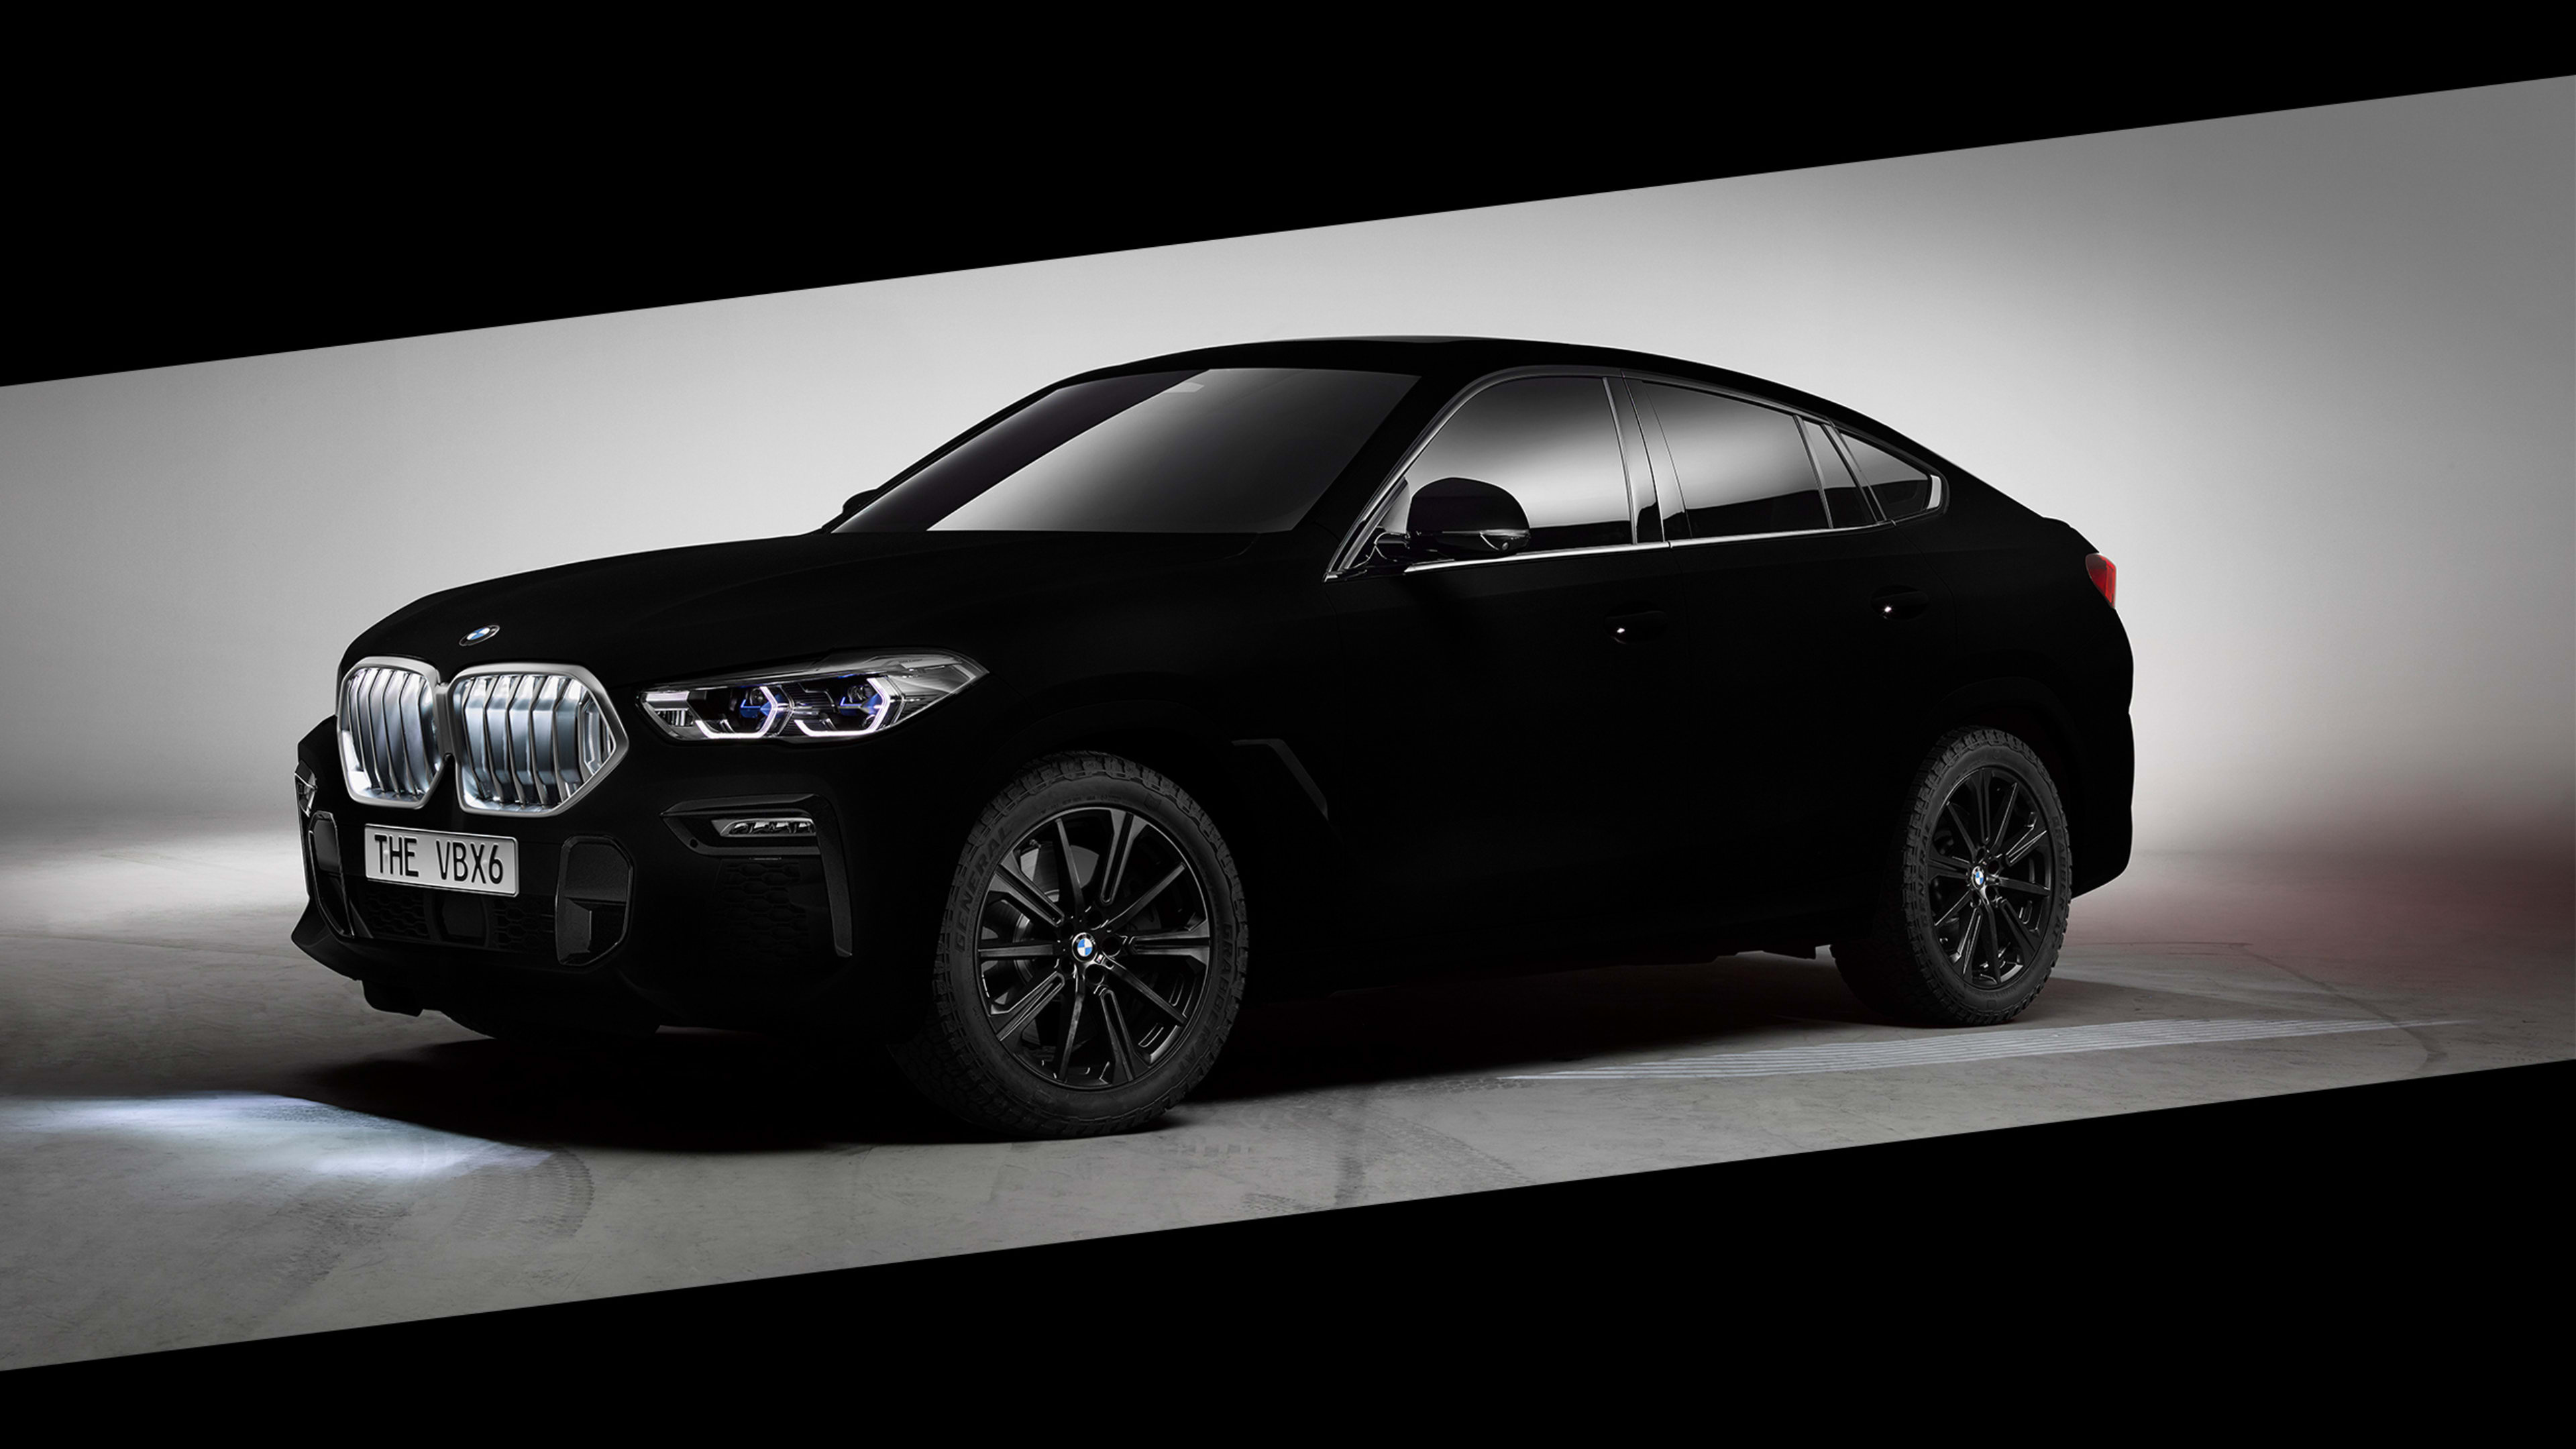 The first car painted with the world’s “blackest black” is deeply unsettling